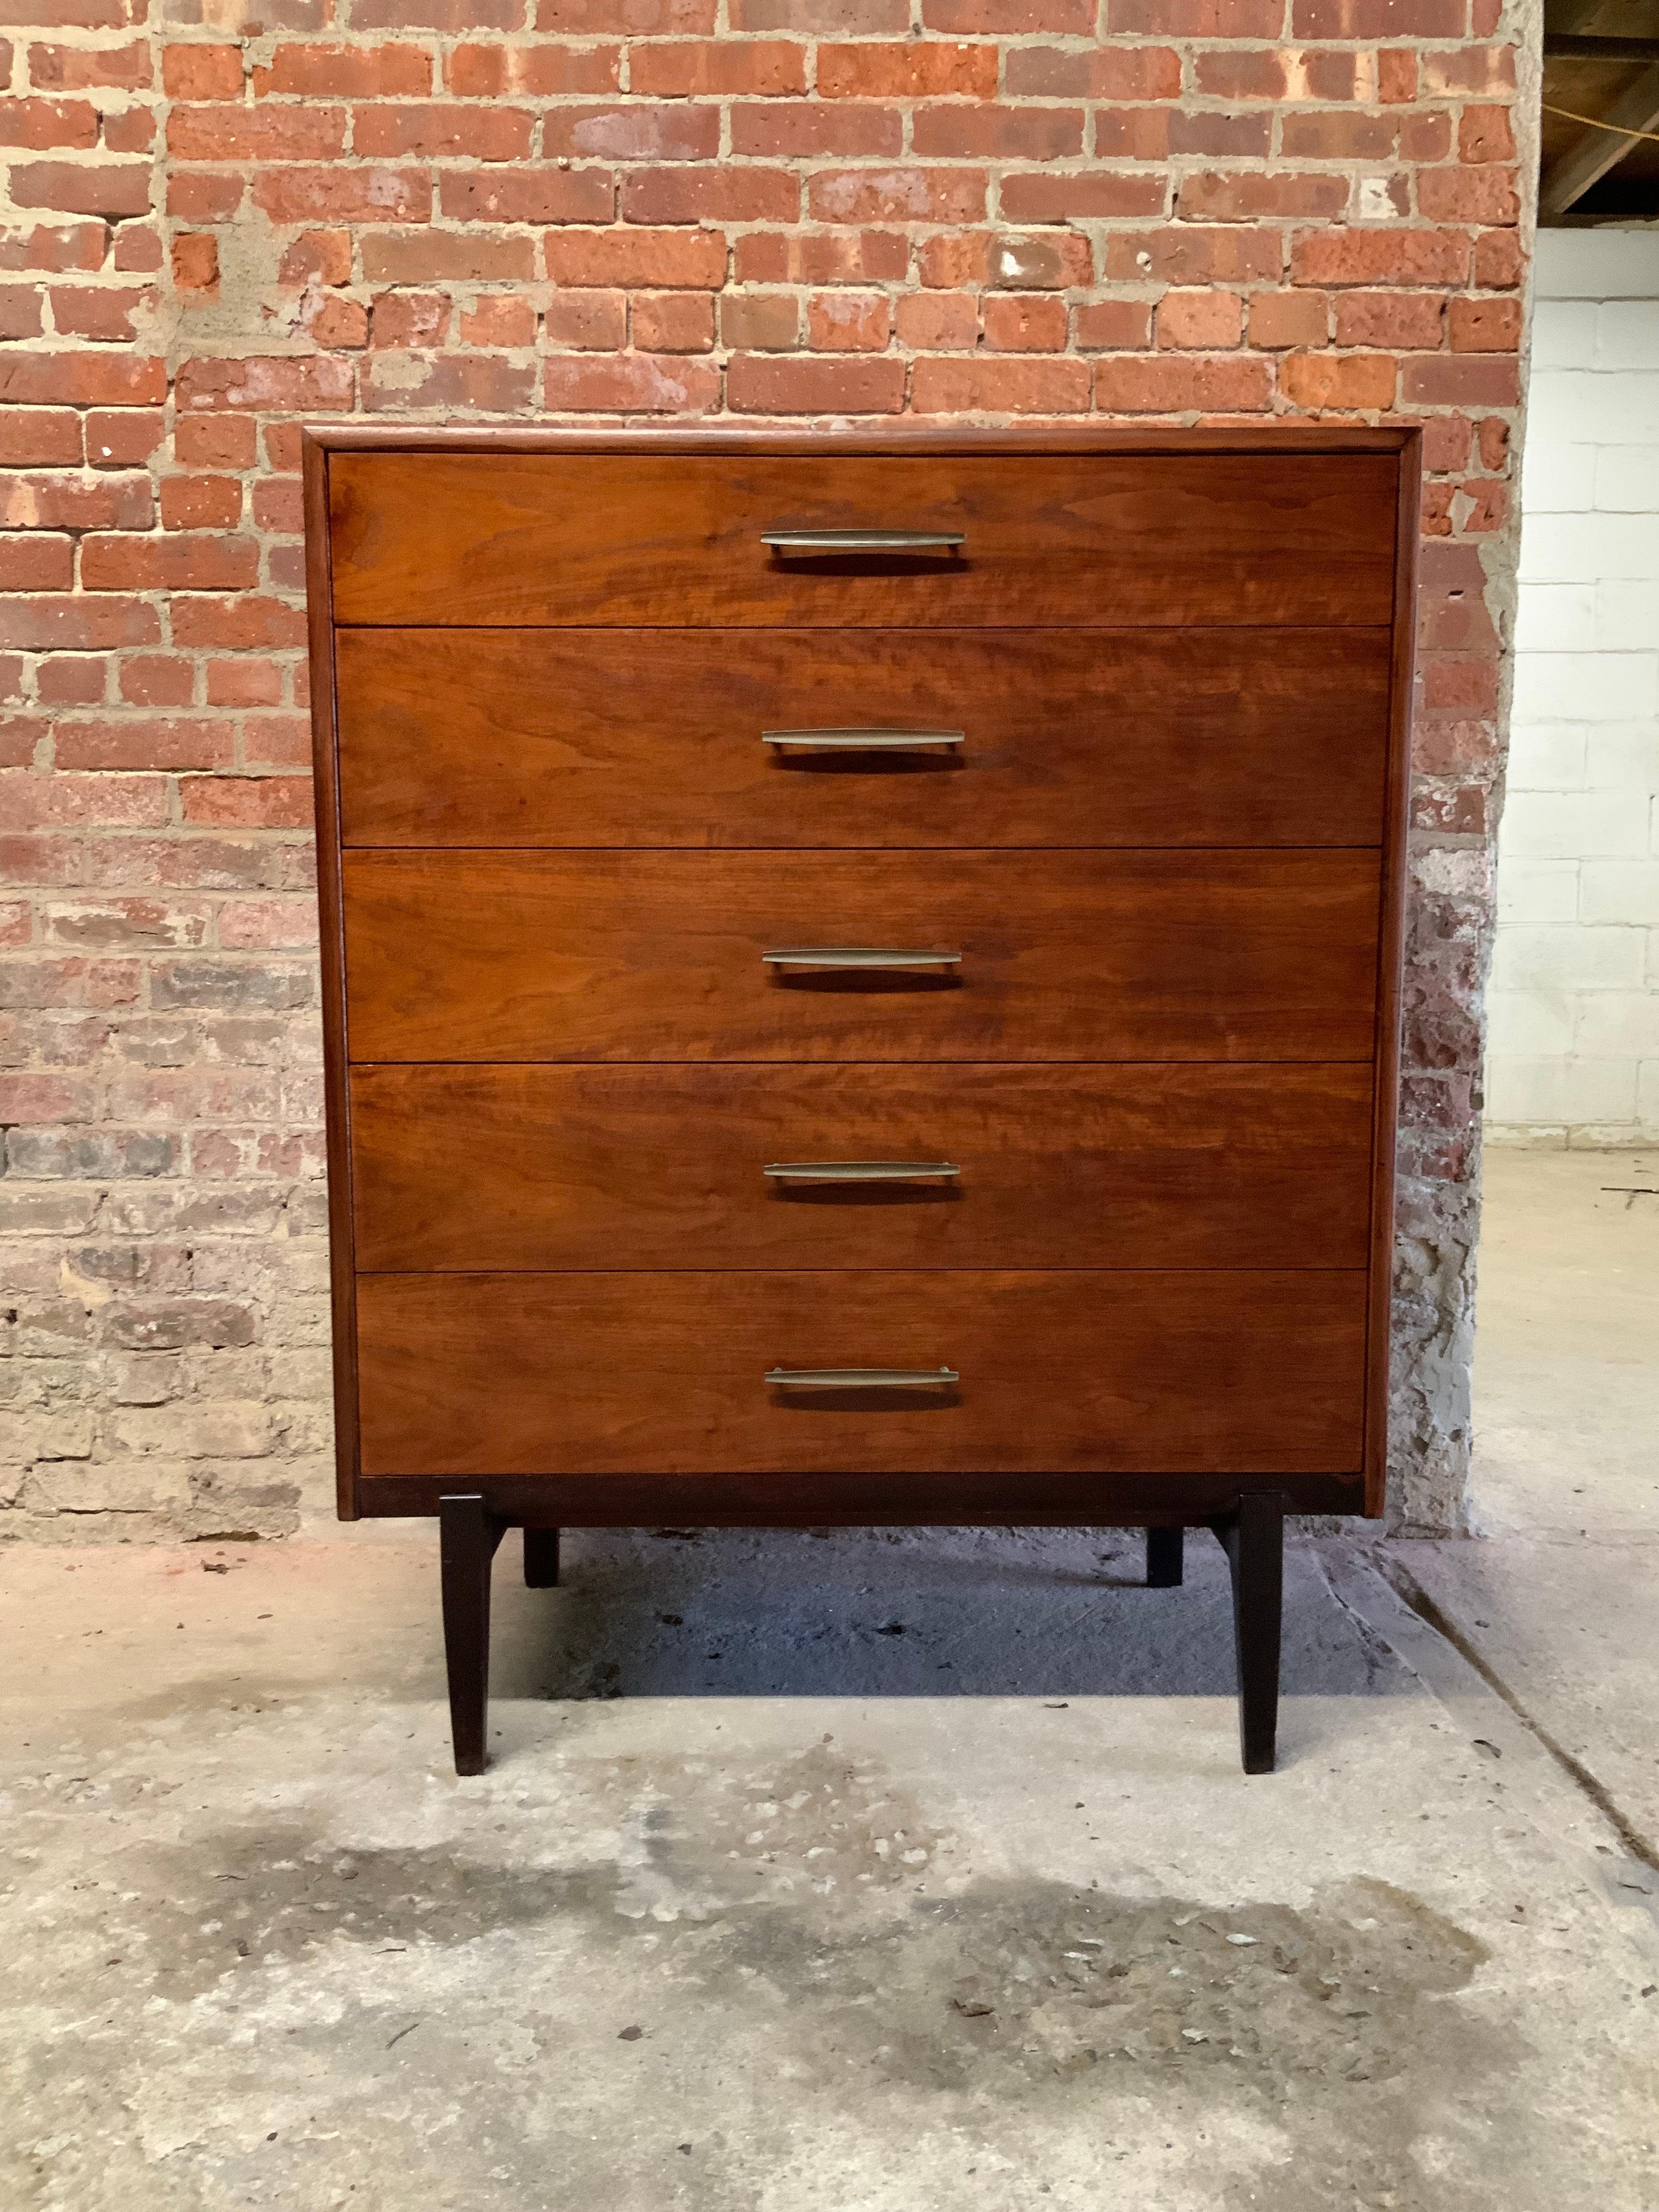 Ramseur, North Carolina quality five drawer Walnut dresser. Featuring nicely figured Walnut veneers, tapered legs and deep storage. Circa 1965-70. Signed with burn in mark in top drawer.

Structurally sound and sturdy